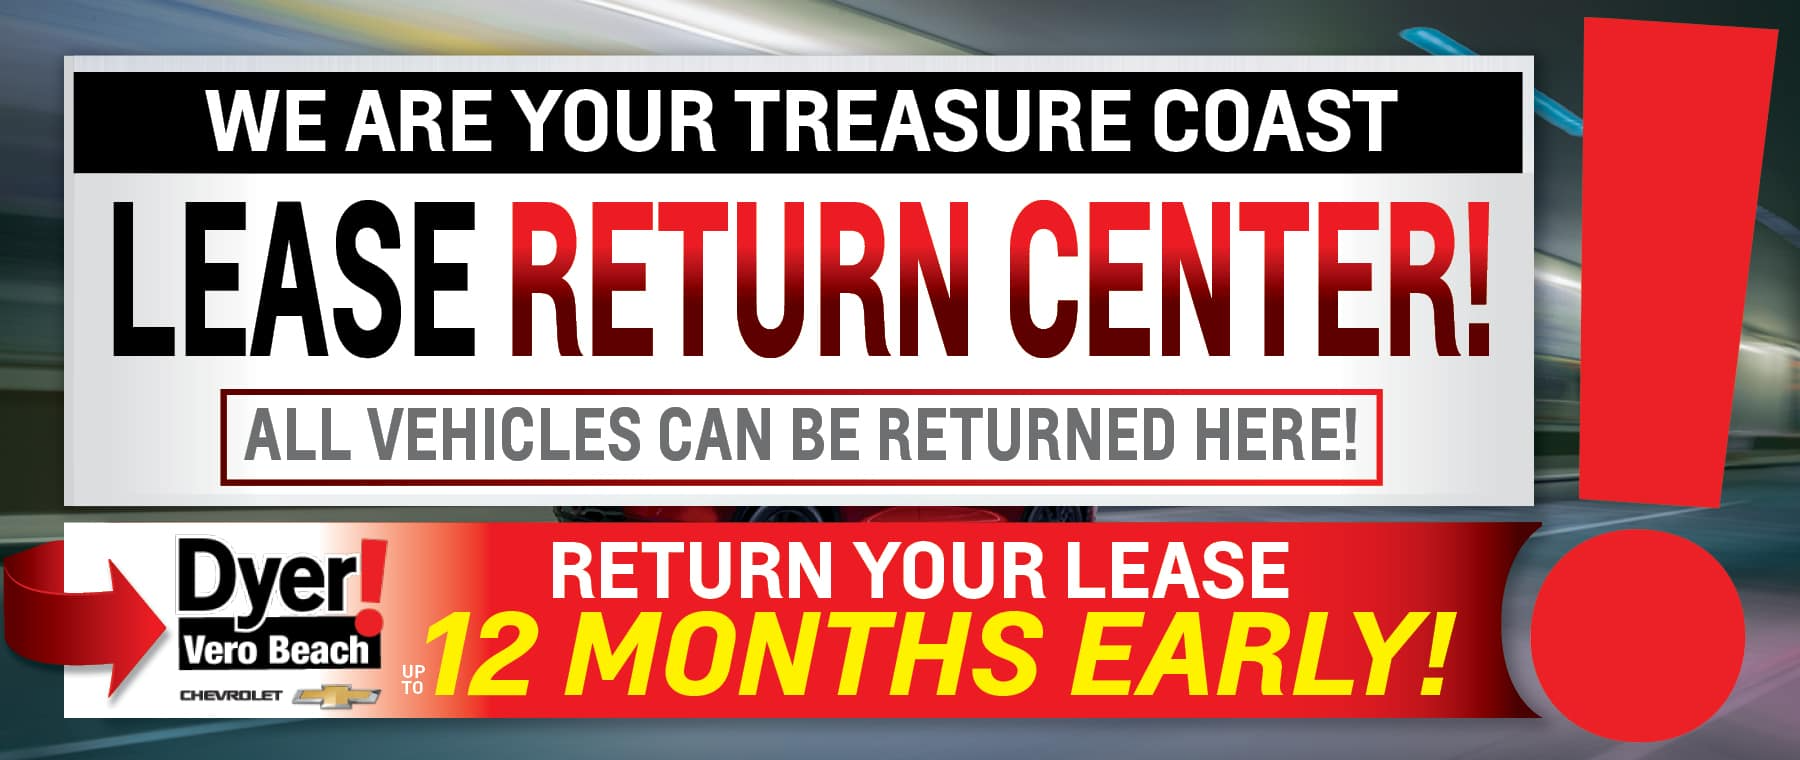 banner image of a lease return center infographic